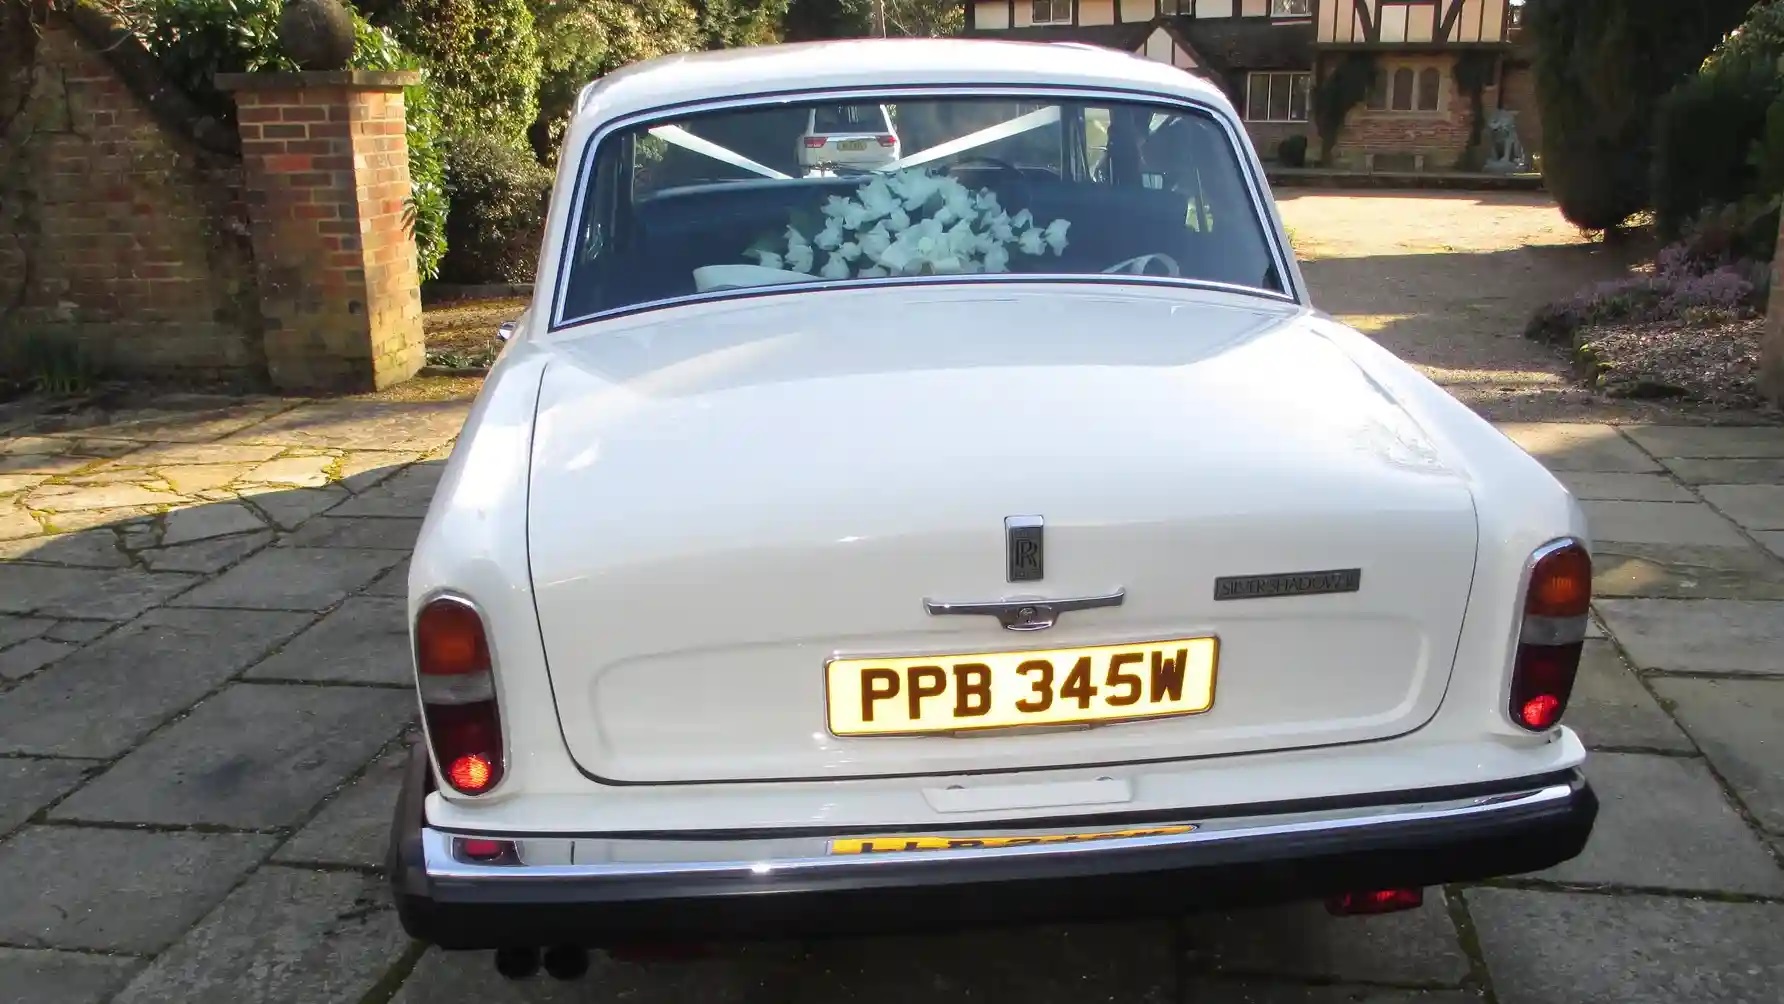 Rear view of Classic Rolls-Royce Silver shdaow showing the posy of wedding flowers on the parcel shelf through the rear window